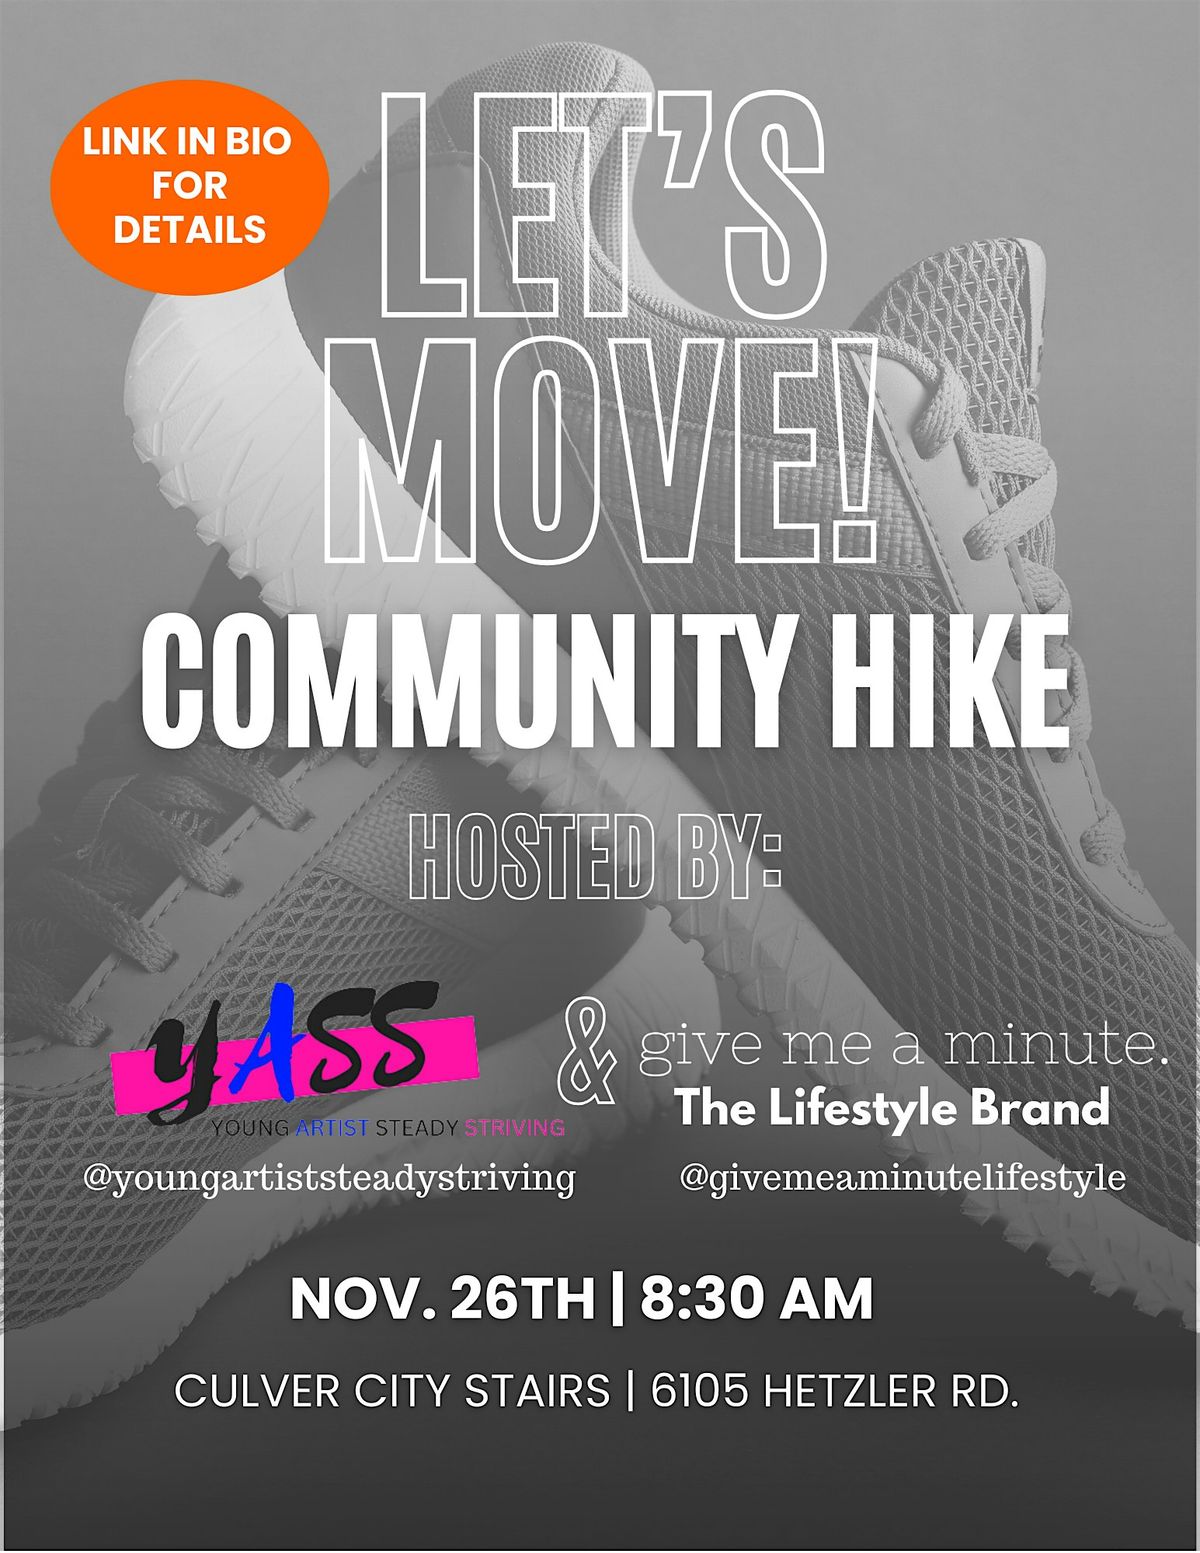 Copy of LET'S MOVE: COMMUNITY HIKE